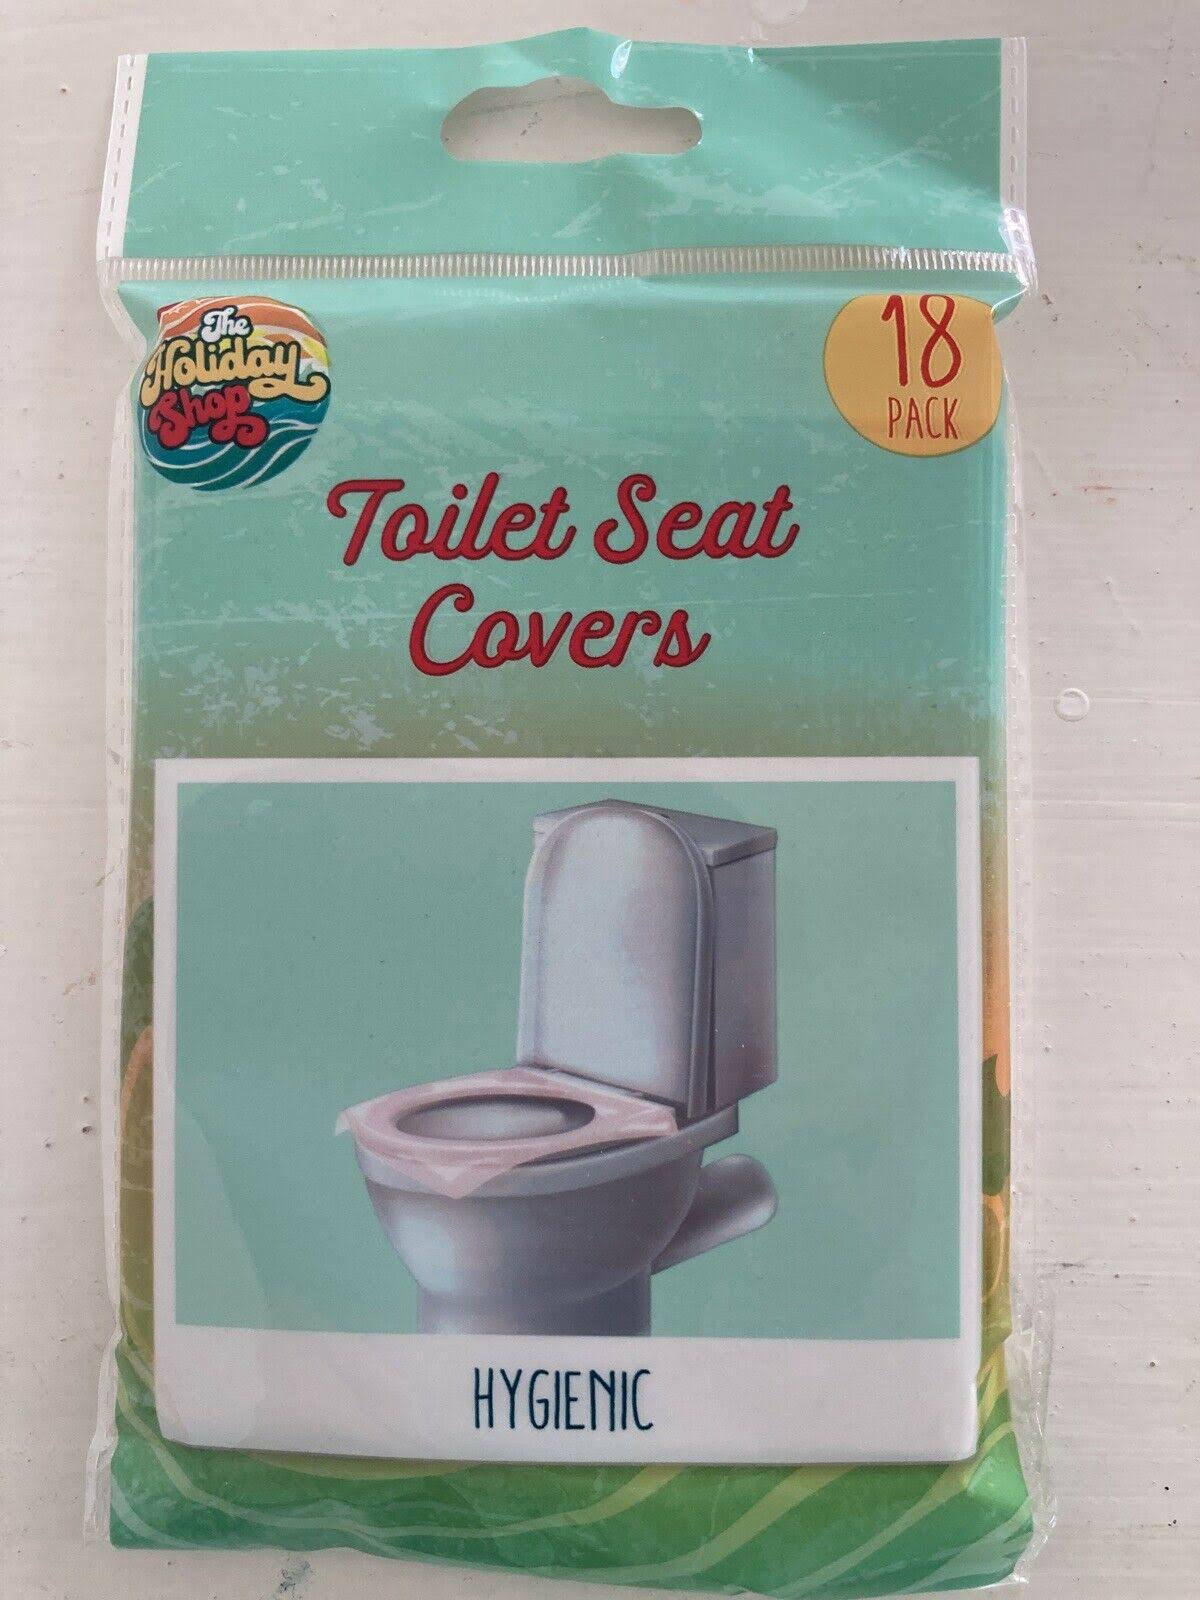 Toilet Seat Covers 18 Pack, Hygenic and Travel Friendly